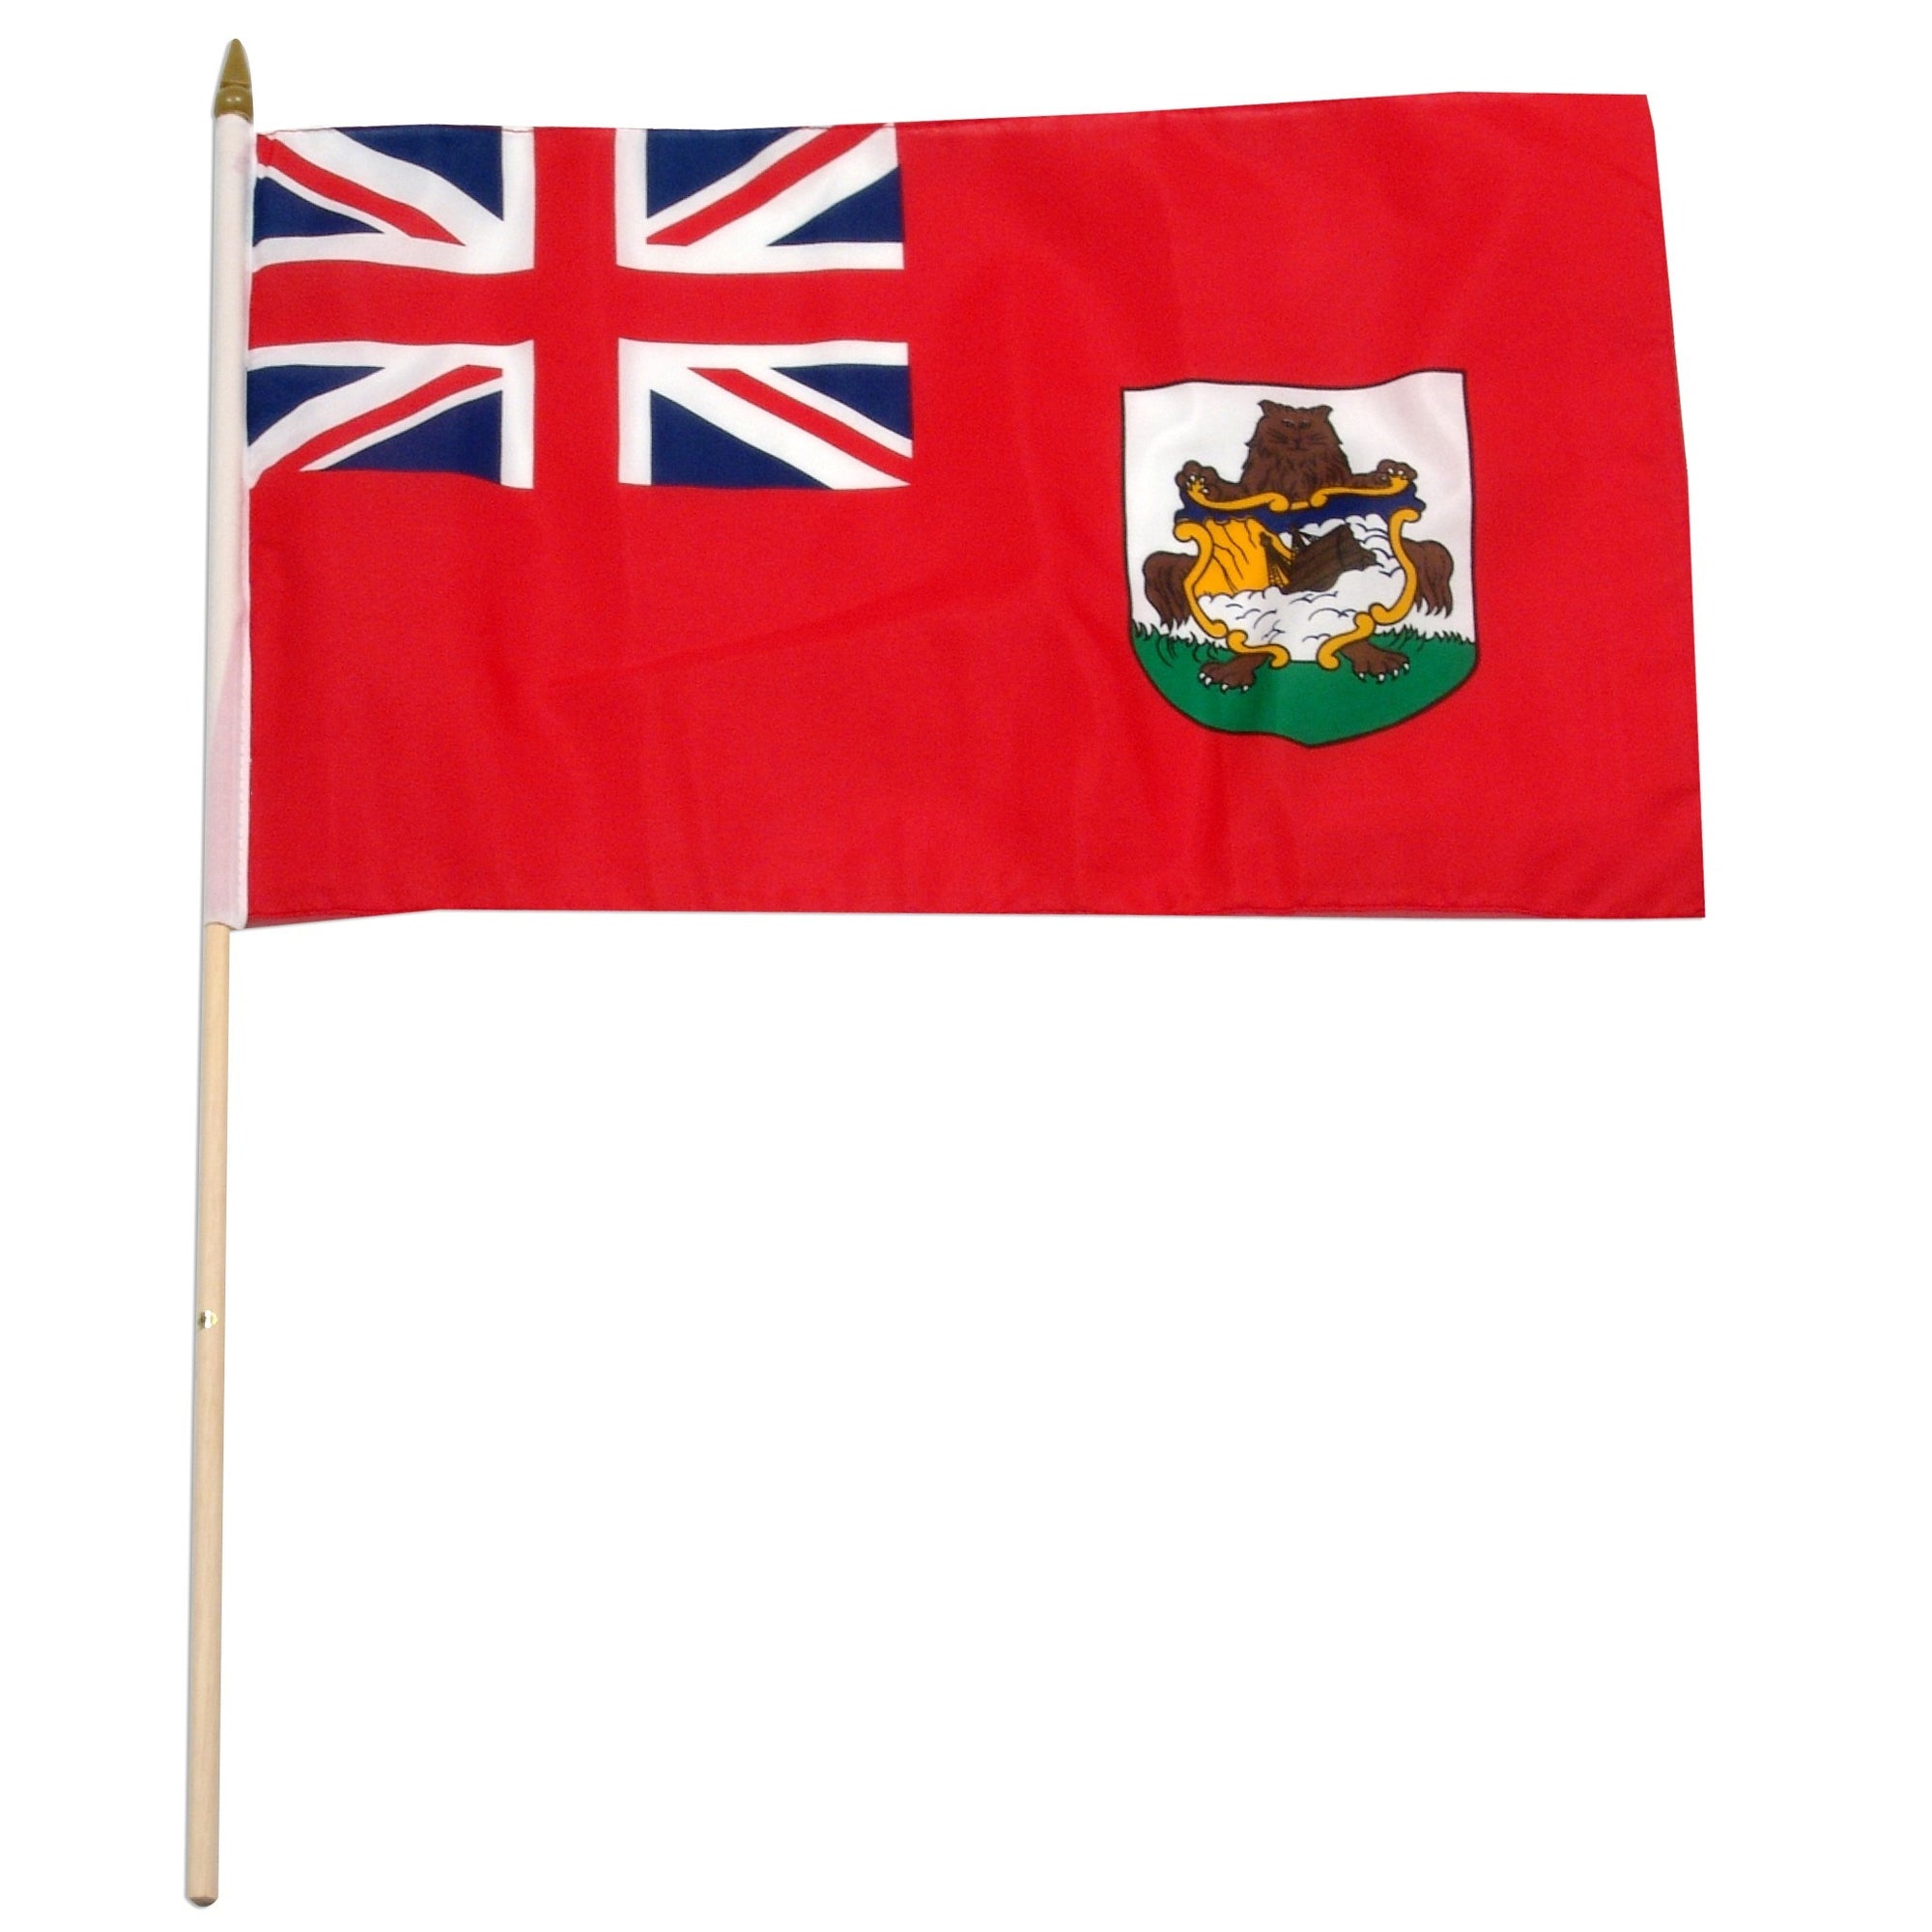 Bermuda world island flags for sale. Cheap stick flags for schools, churches and businesses